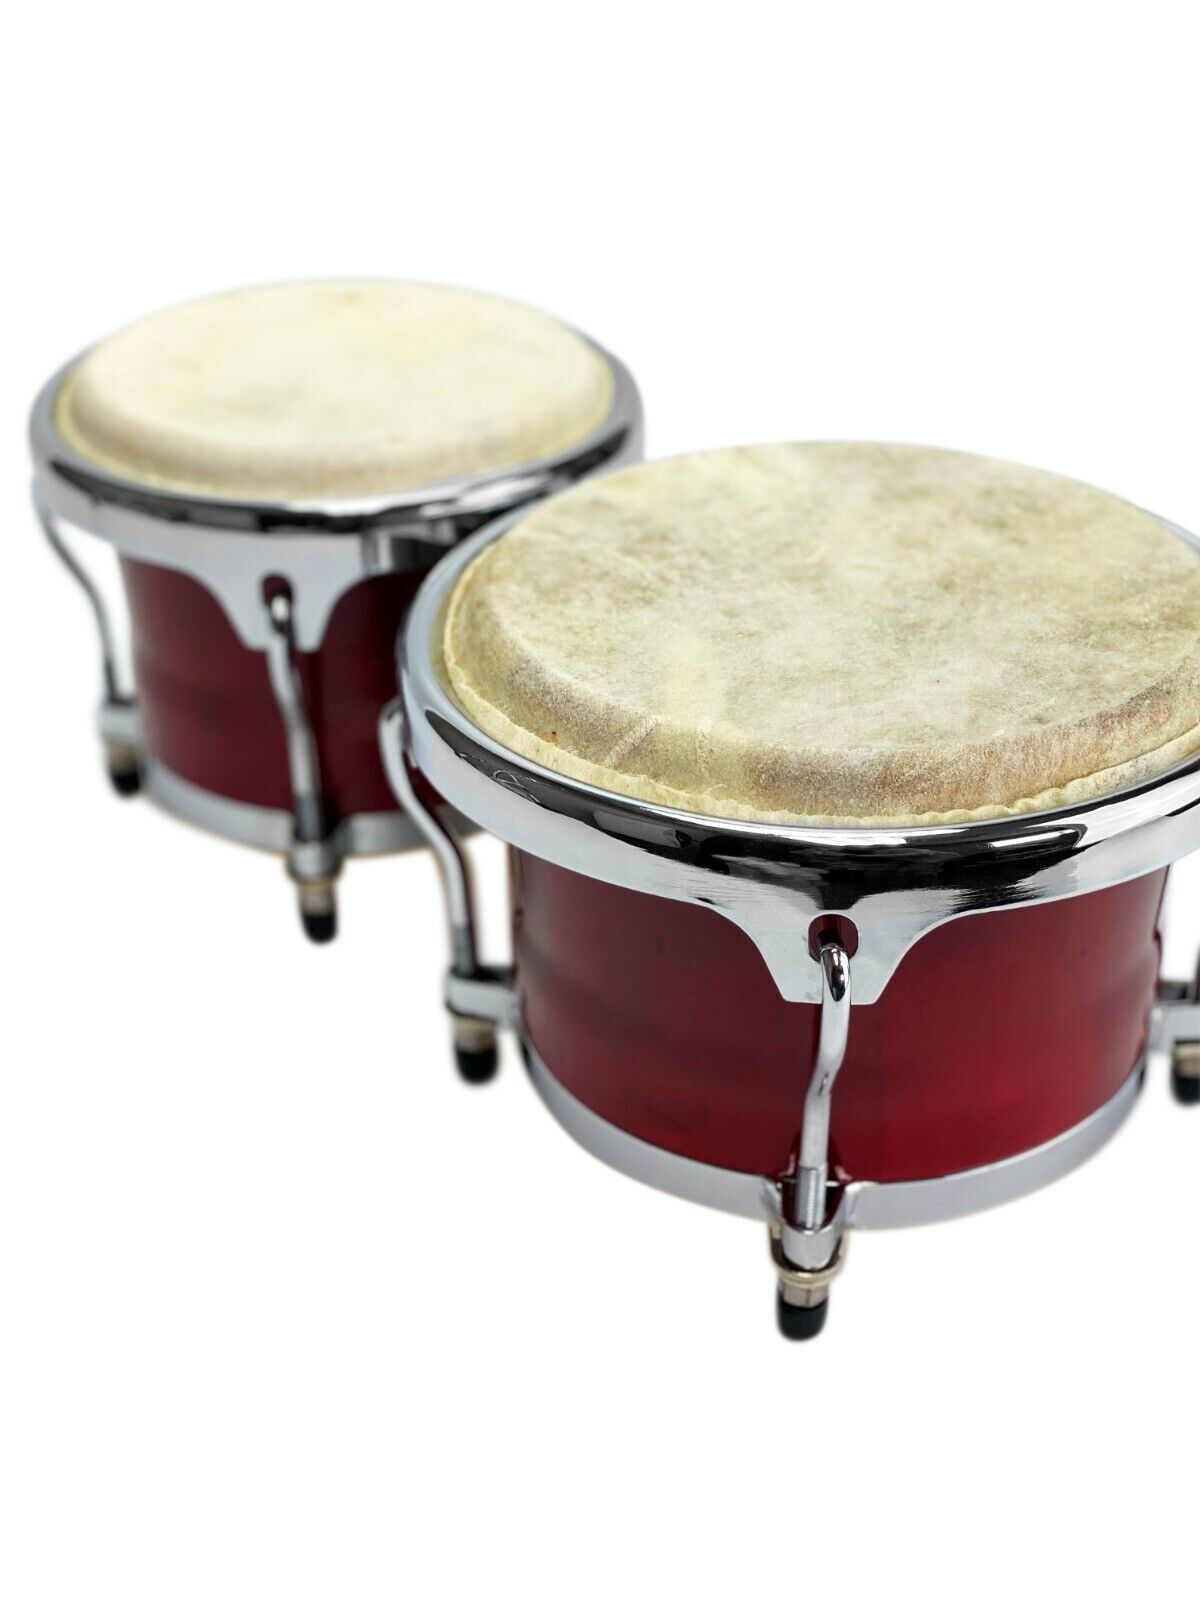 Zension 8″ and 9″ Bongo Drum Set Red Wood Percussion Instrument With Tuning Key 2